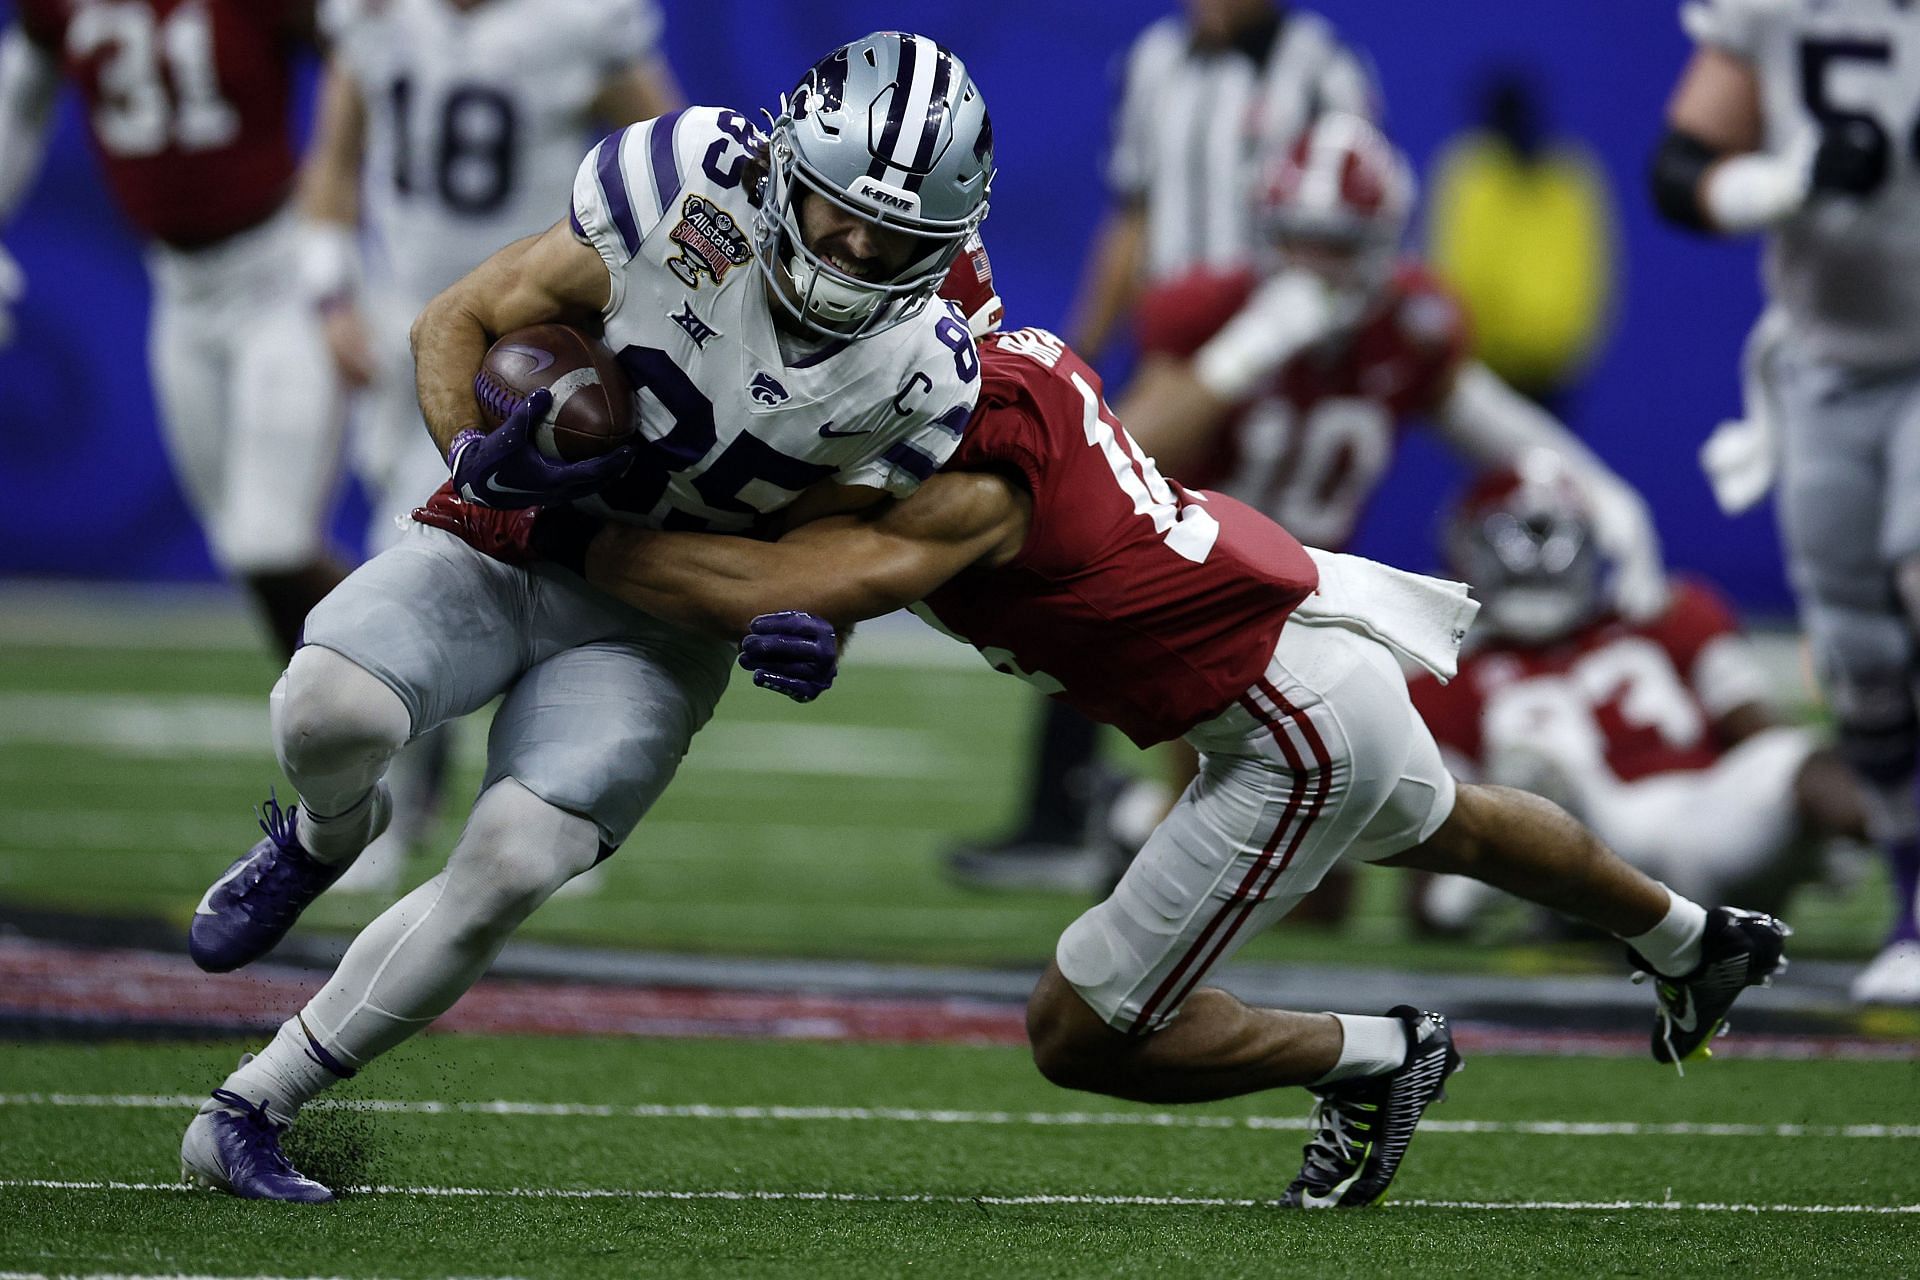  Will Swanson #83 of the Kansas State Wildcats is tackled by Brian Branch